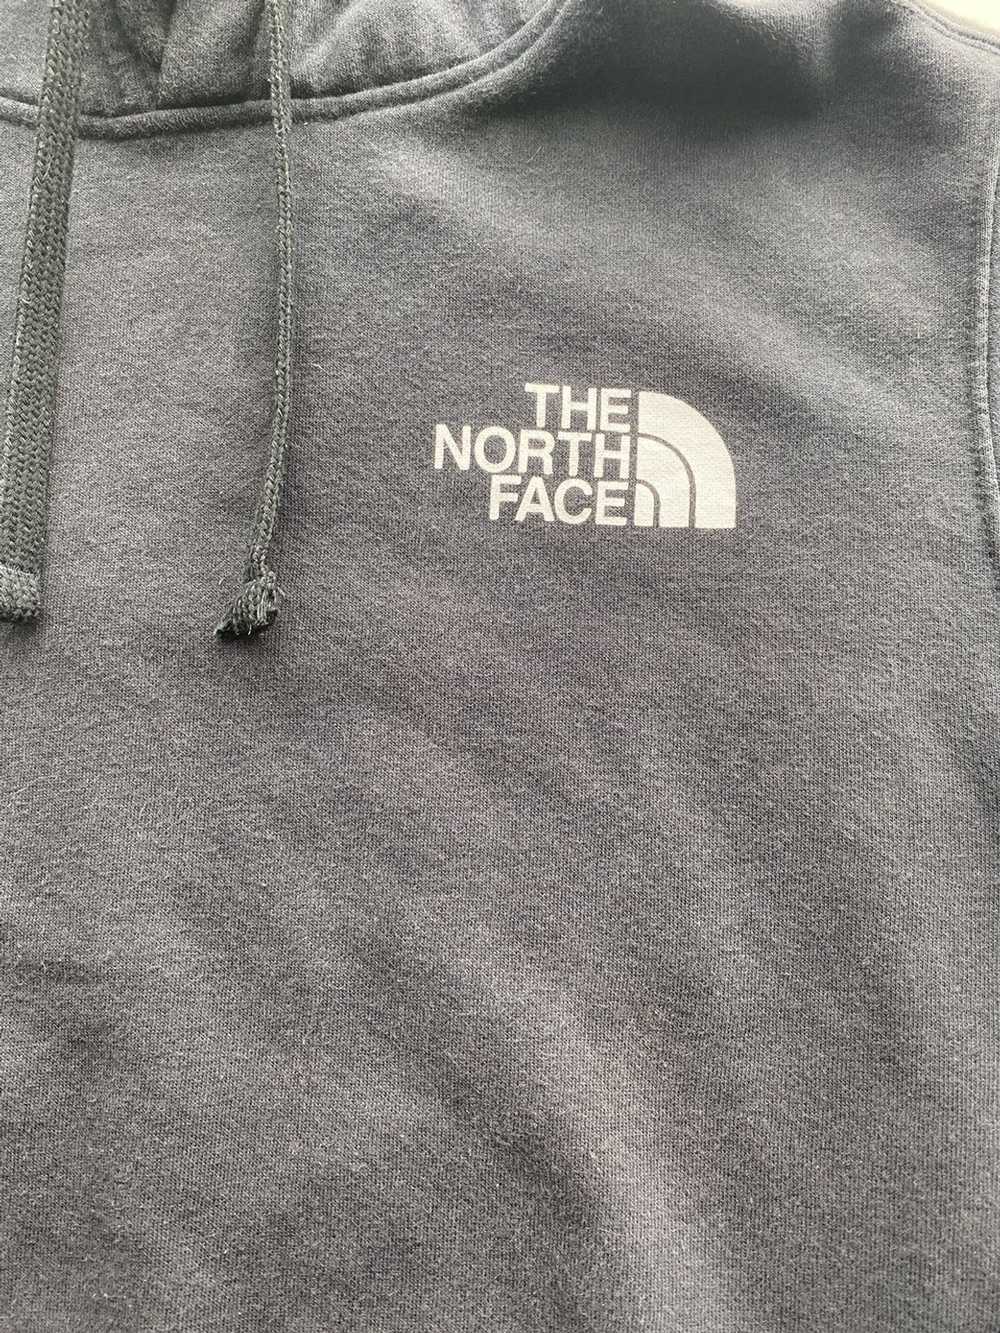 Outdoor Life × Streetwear × The North Face Black … - image 3